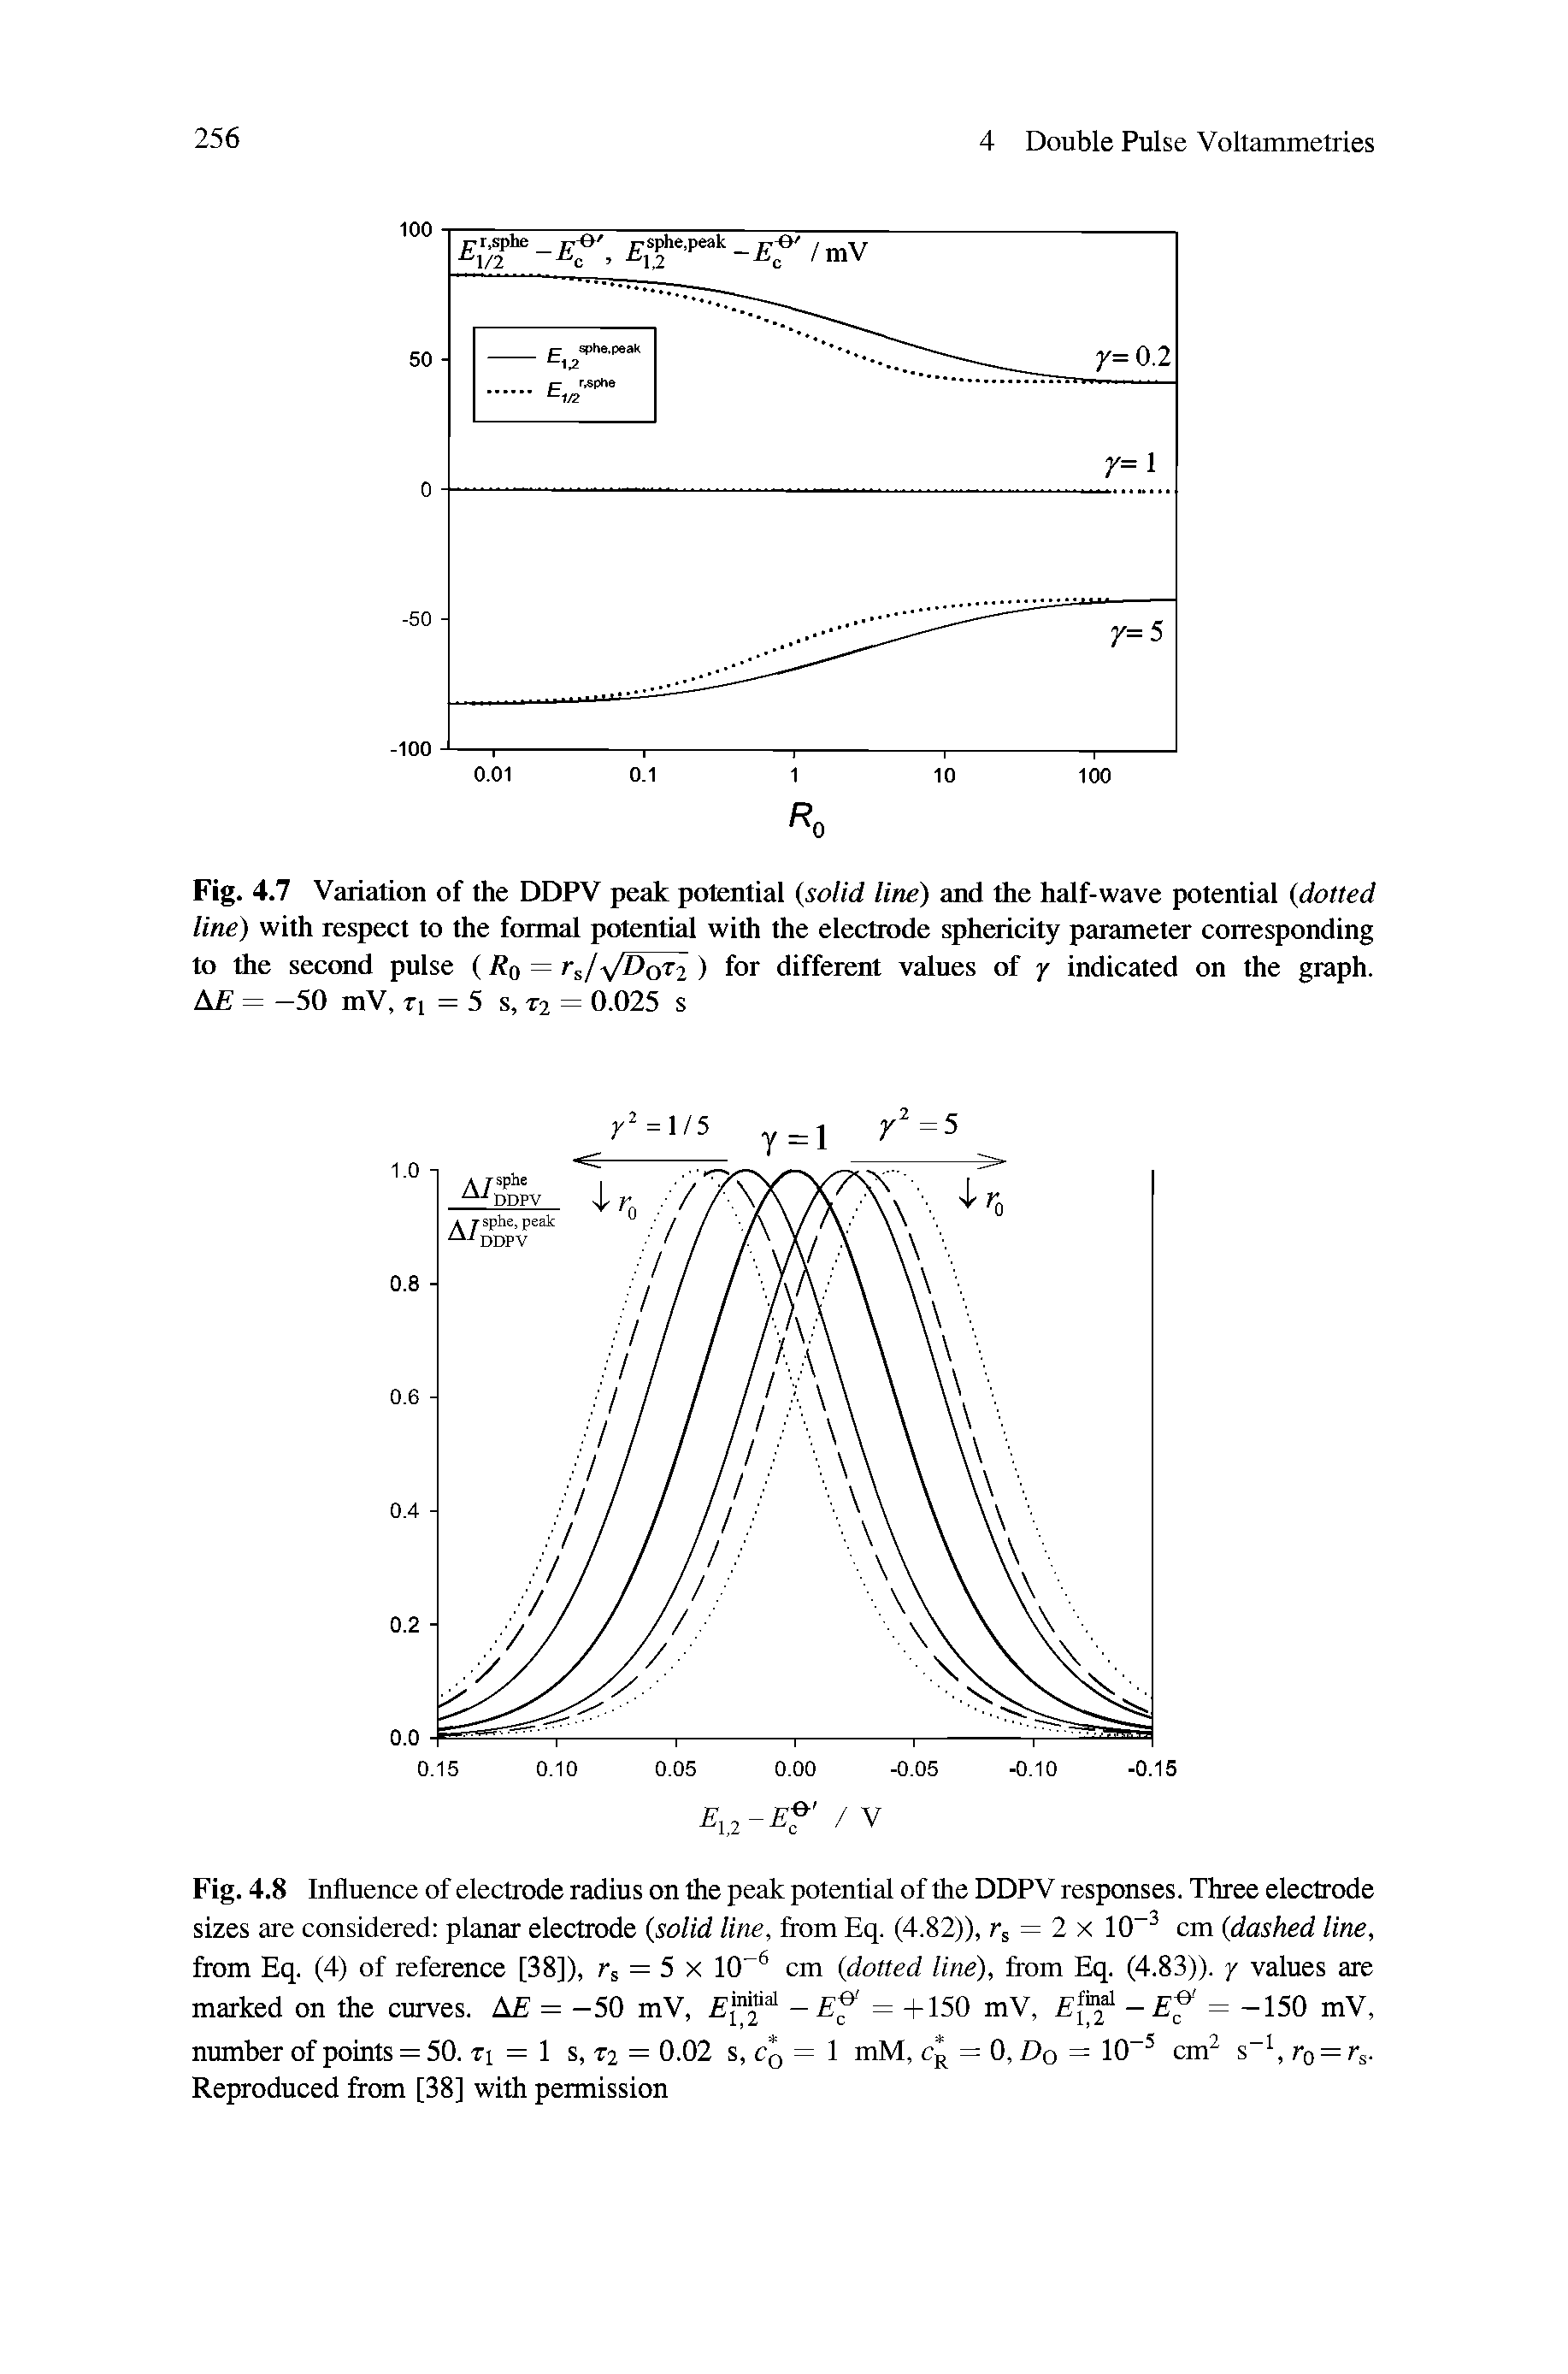 Fig. 4.7 Variation of the DDPV peak potential (solid line) and the half-wave potential (dotted line) with respect to the formal potential with the electrode sphericity parameter corresponding to the second pulse (Rq = rs/ D0Ti ) for different values of y indicated on the graph. AE = -50 mV, n = 5 s, t2 = 0.025 s...